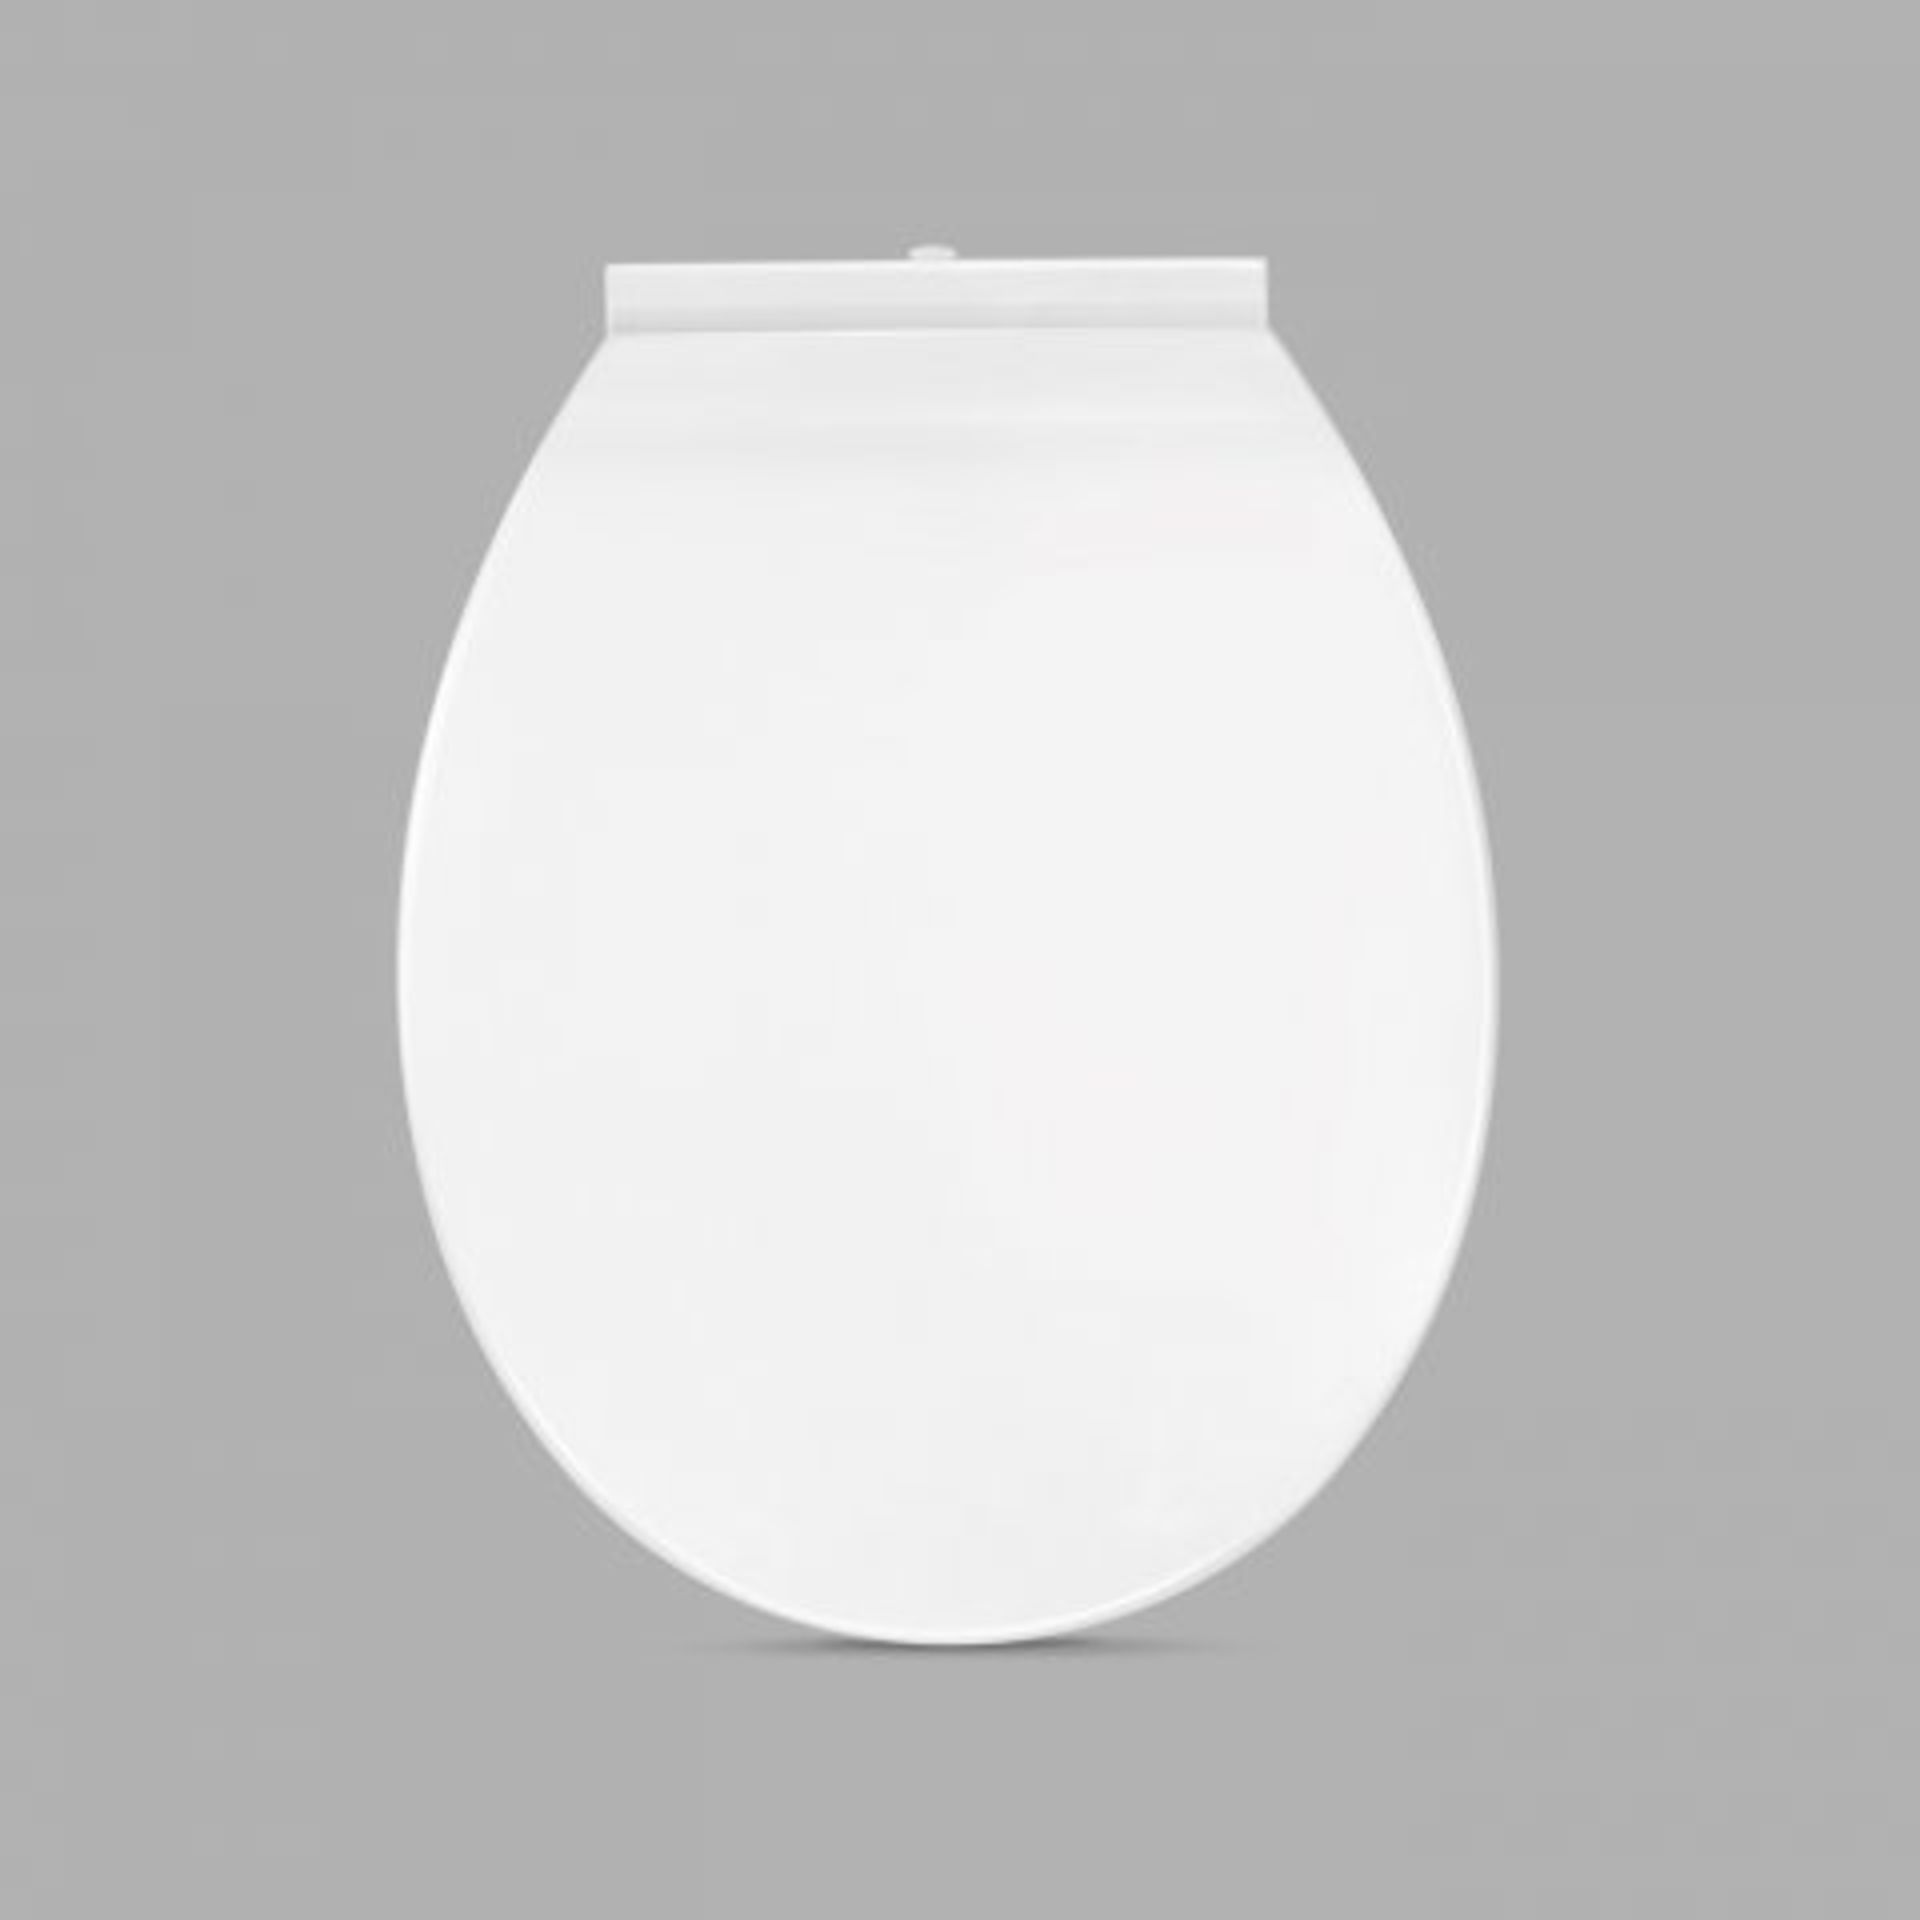 (N69) Crosby Toilet Seat - Soft Closing Our luxury Crosby Soft Close Toilet Seat is provided with